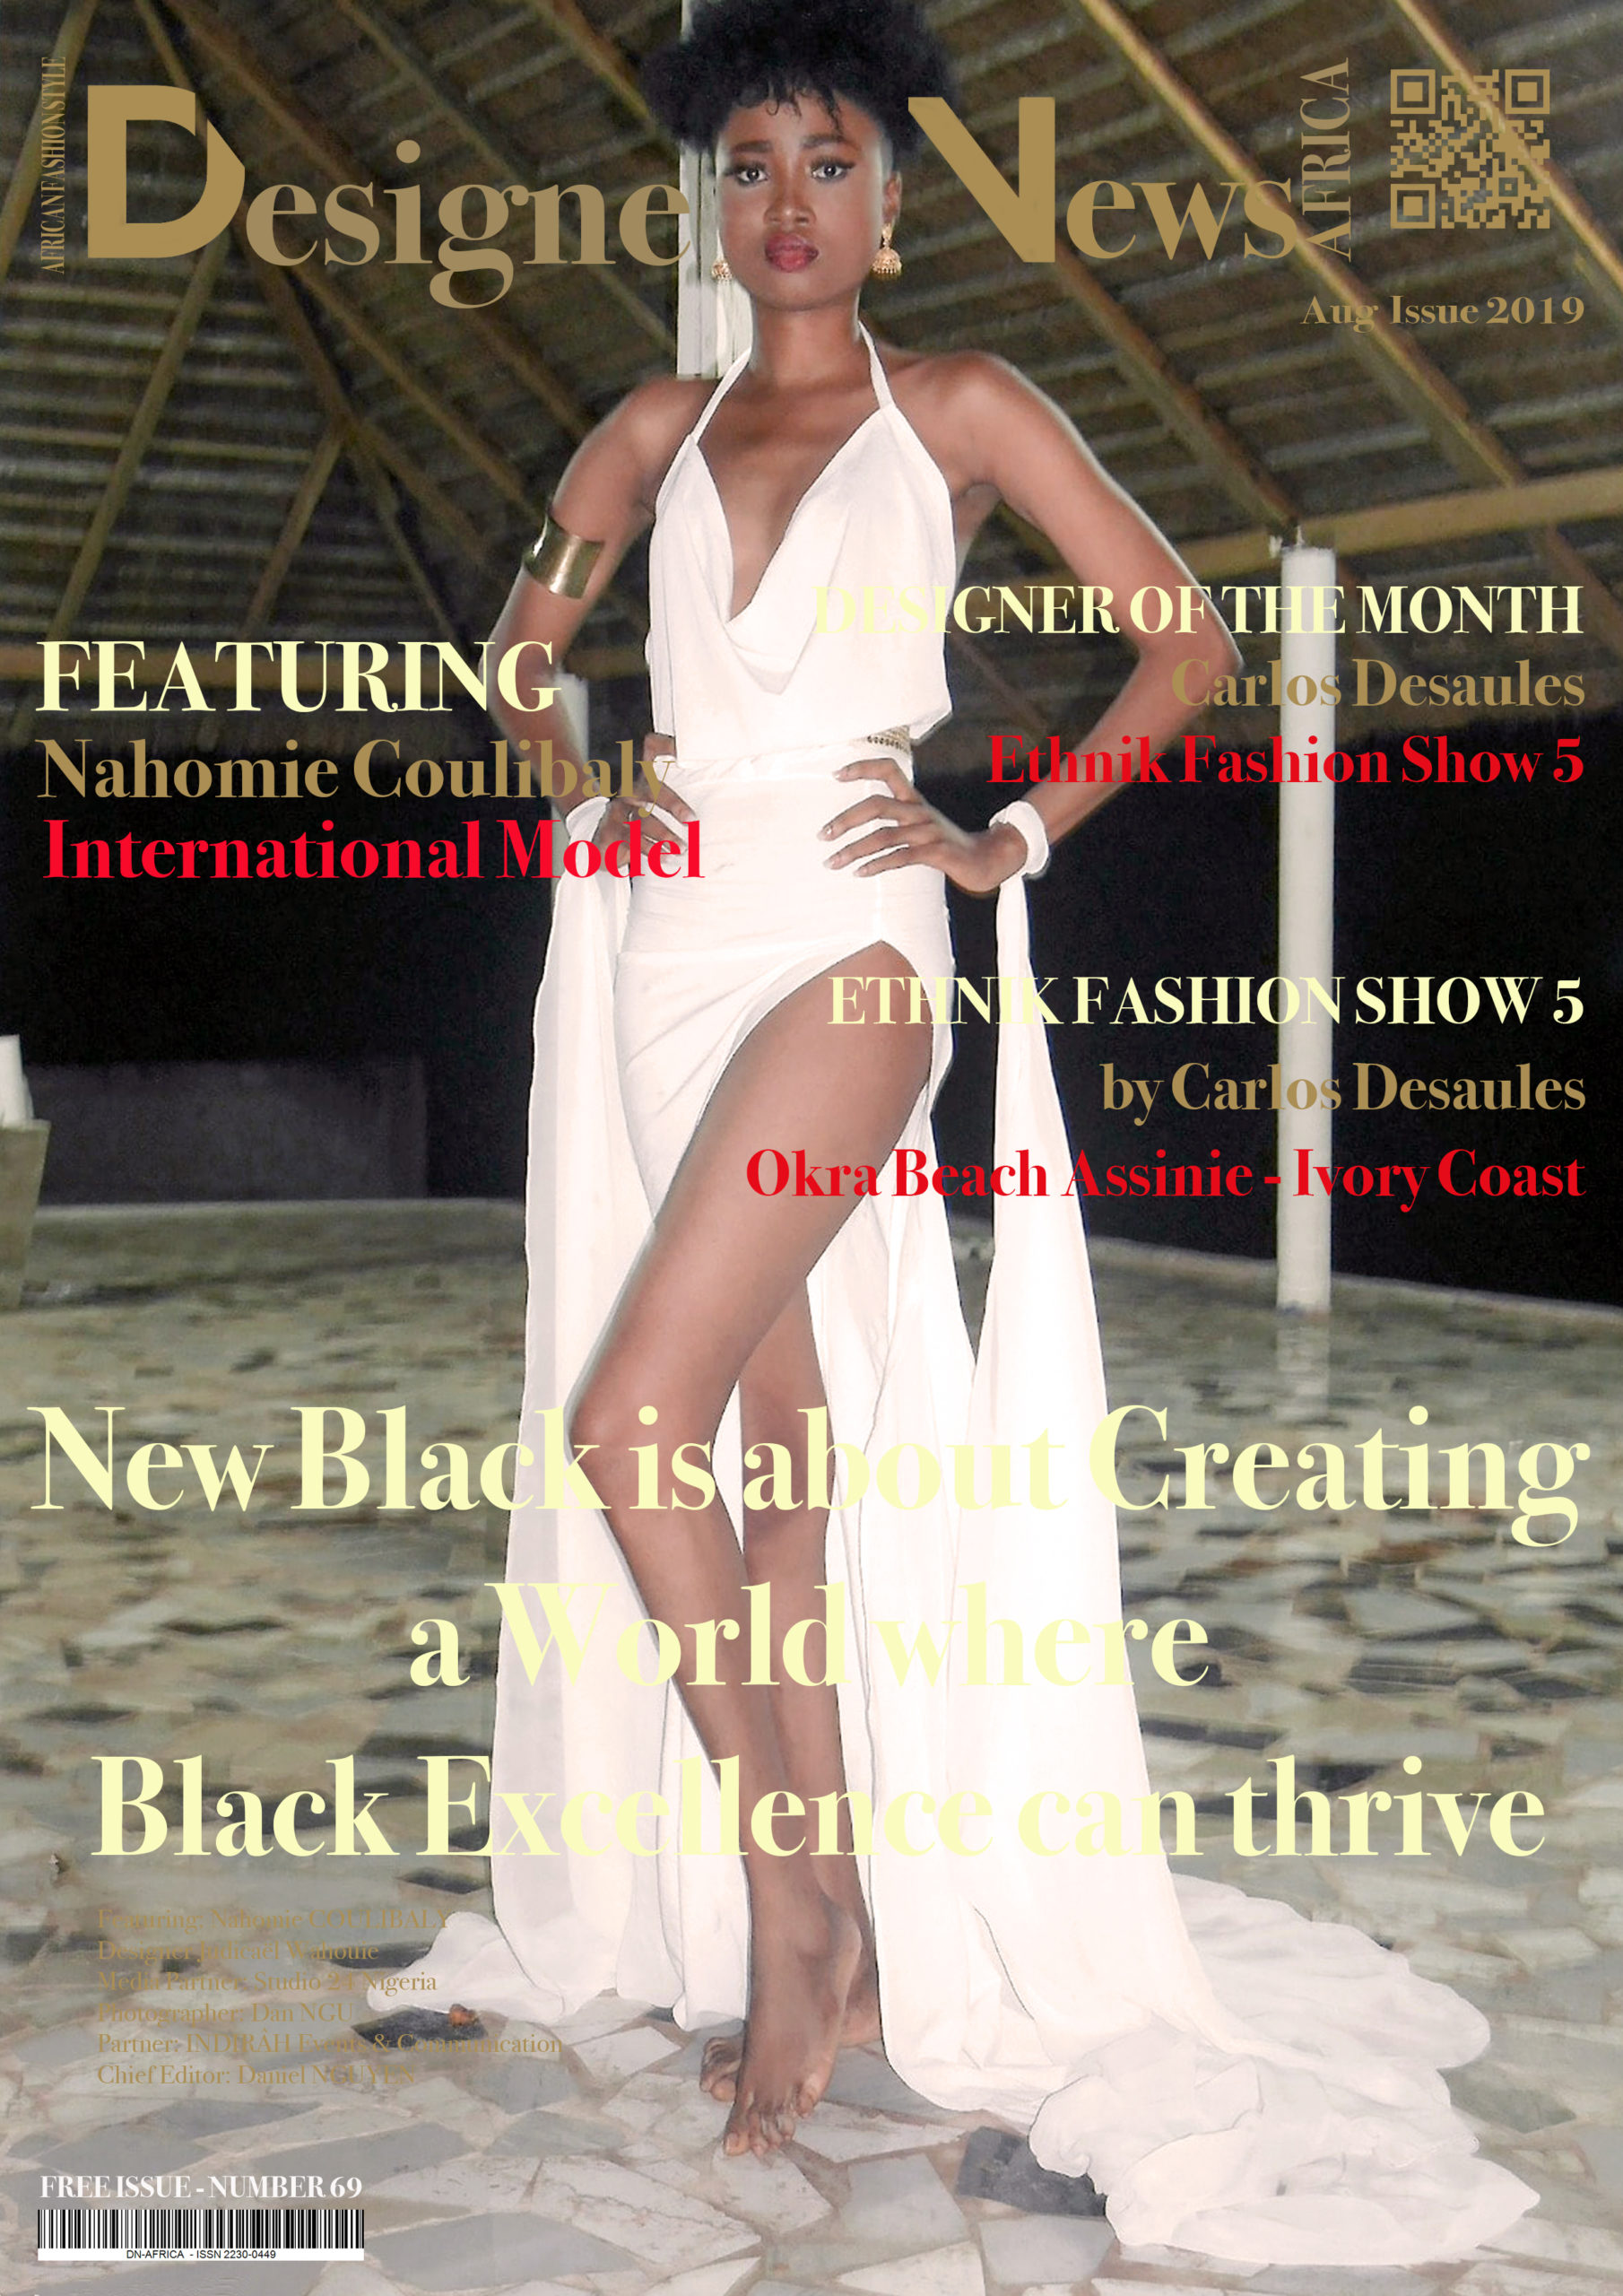 AFRICA-FASHION-STYLE-2490X3508-DN-AFRICA-COVER-NUMBER-64-AUG-5TH-2019--NAHOMIE-COULIBALY--INTERNATIONAL-MODEL-DN-AfrICA-Media-Partner